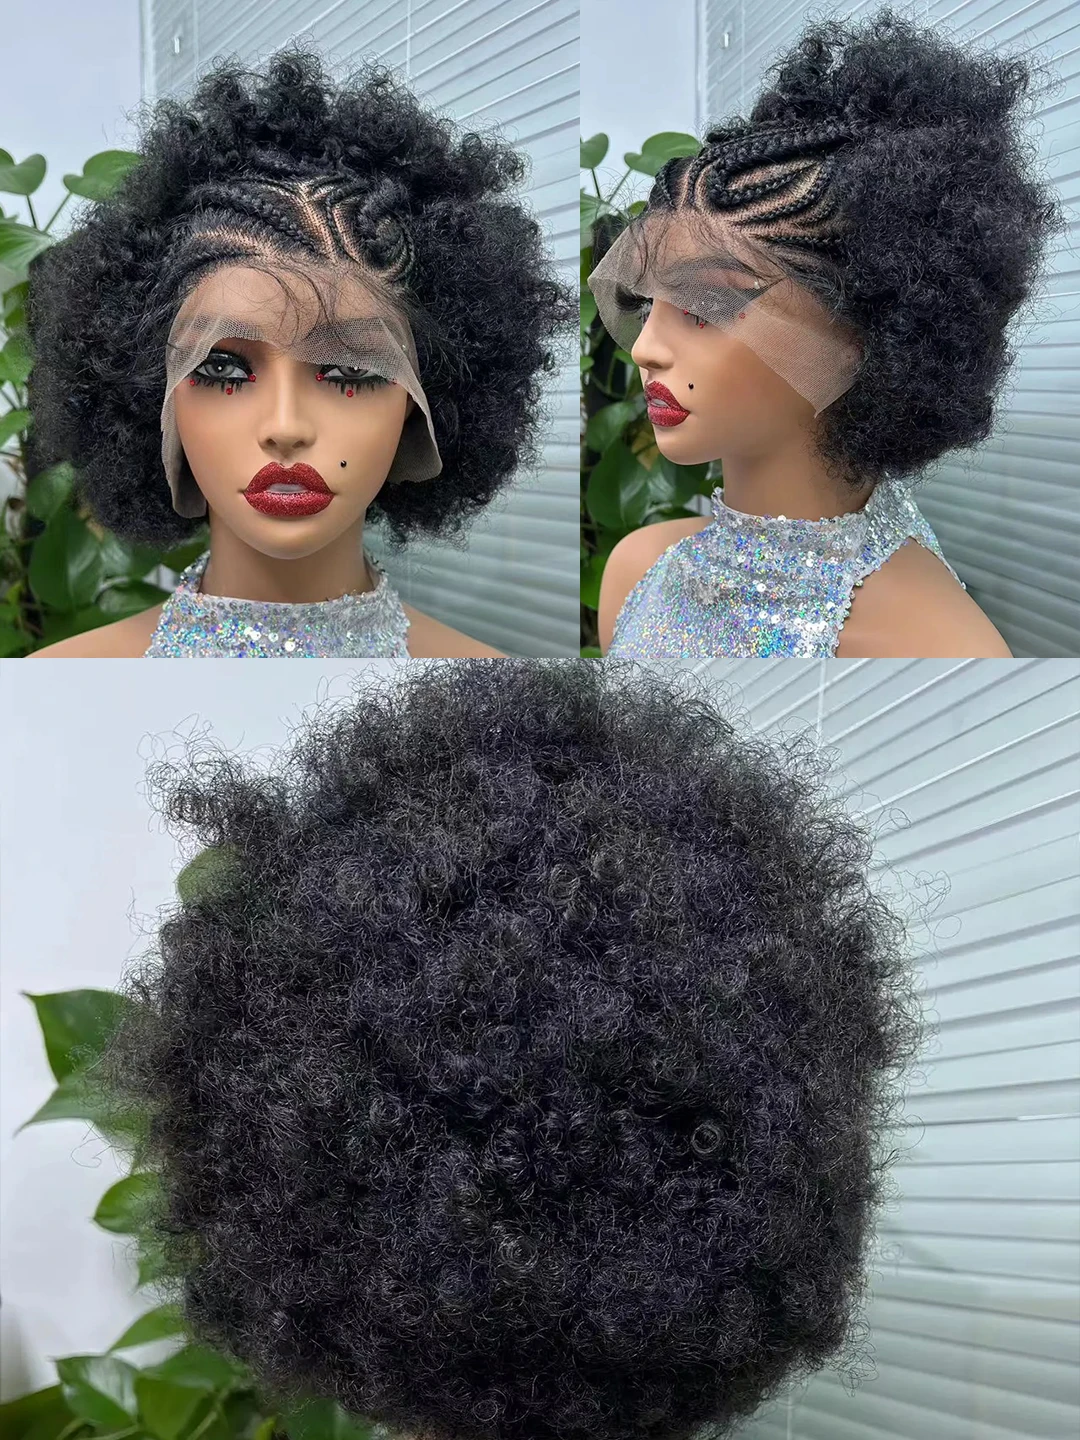 

Glueless Synthetic Lace Front Braided Wig Short Curly Braided Wigs for Black Women Box Braiding Wigs Afro Kinky Curly Hair Wig